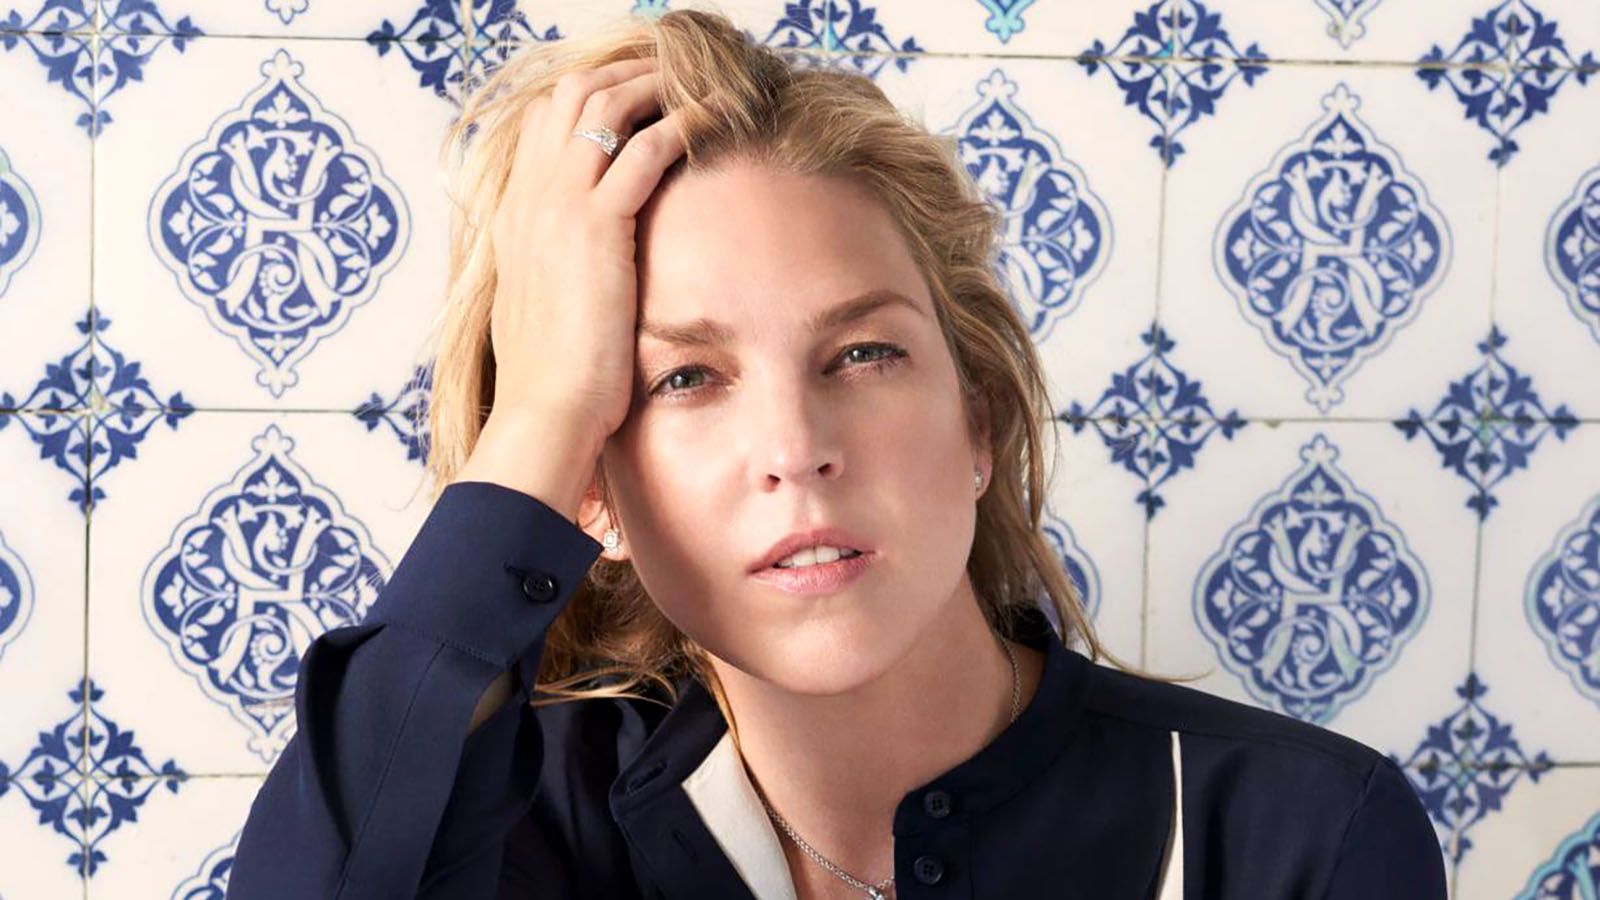 Pianist Diana Krall will perform at Foellinger Theatre on Tuesday, Aug. 1.